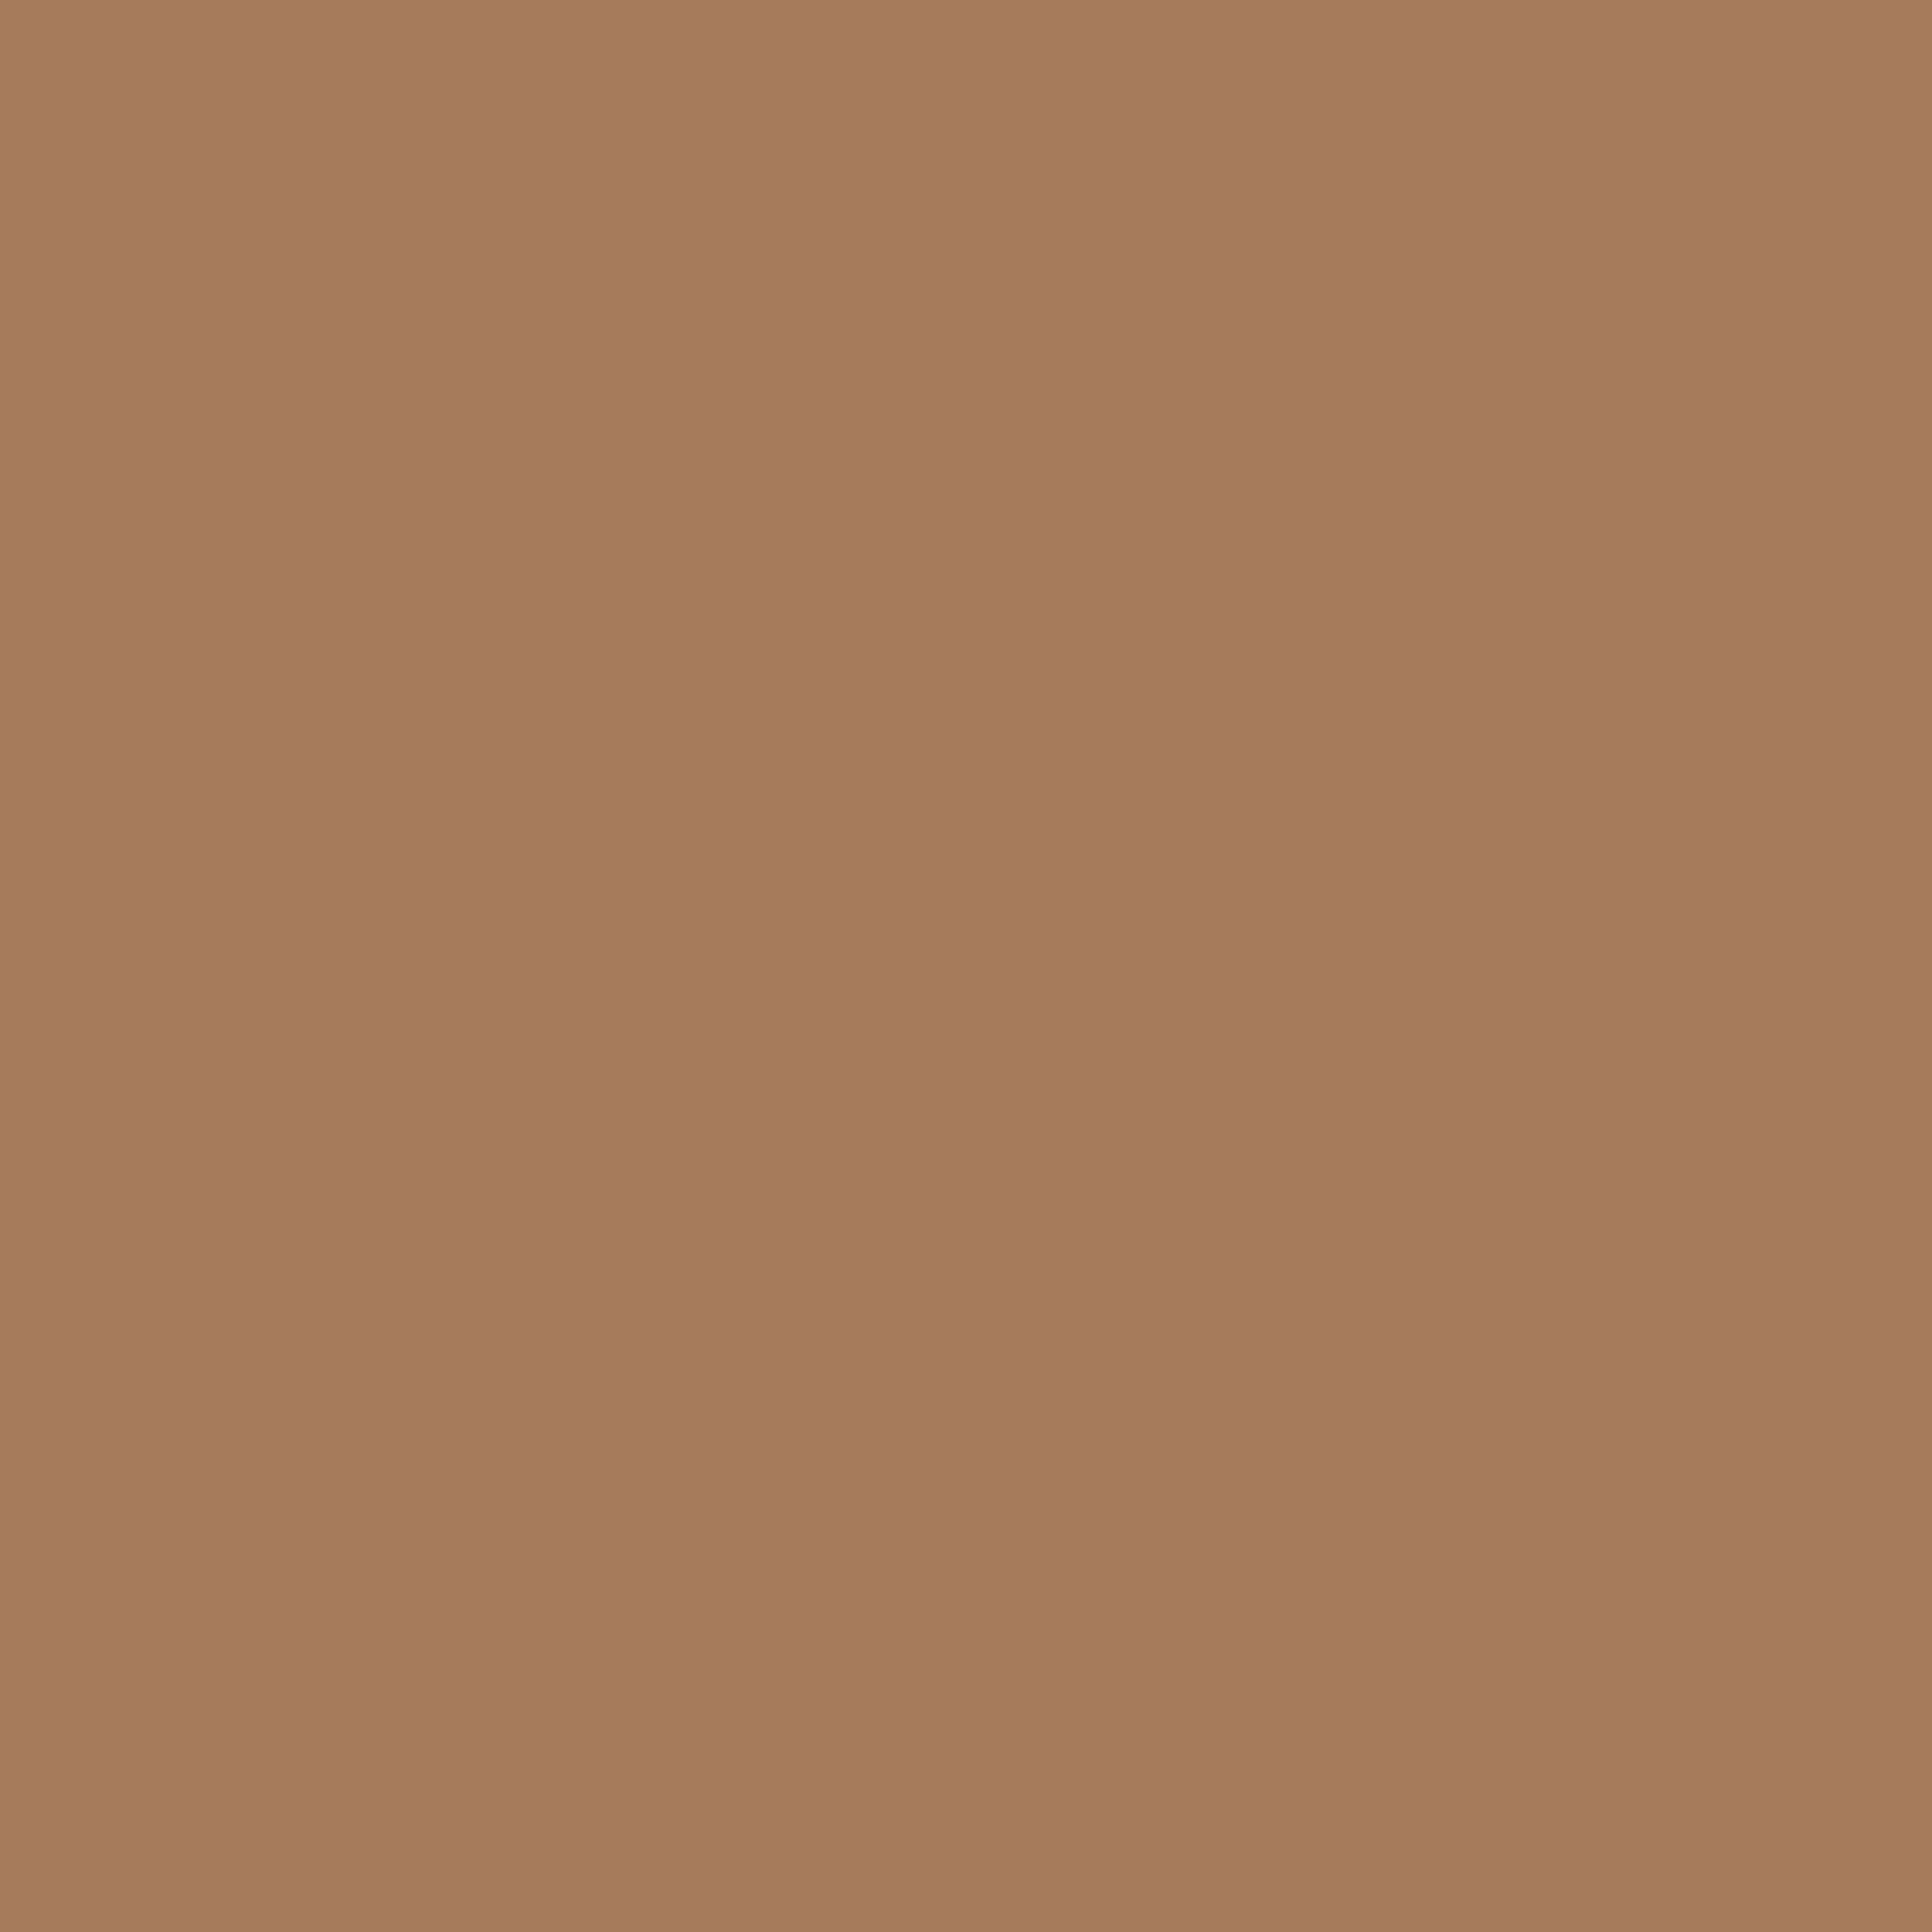 3600x3600 Tuscan Tan Solid Color Background